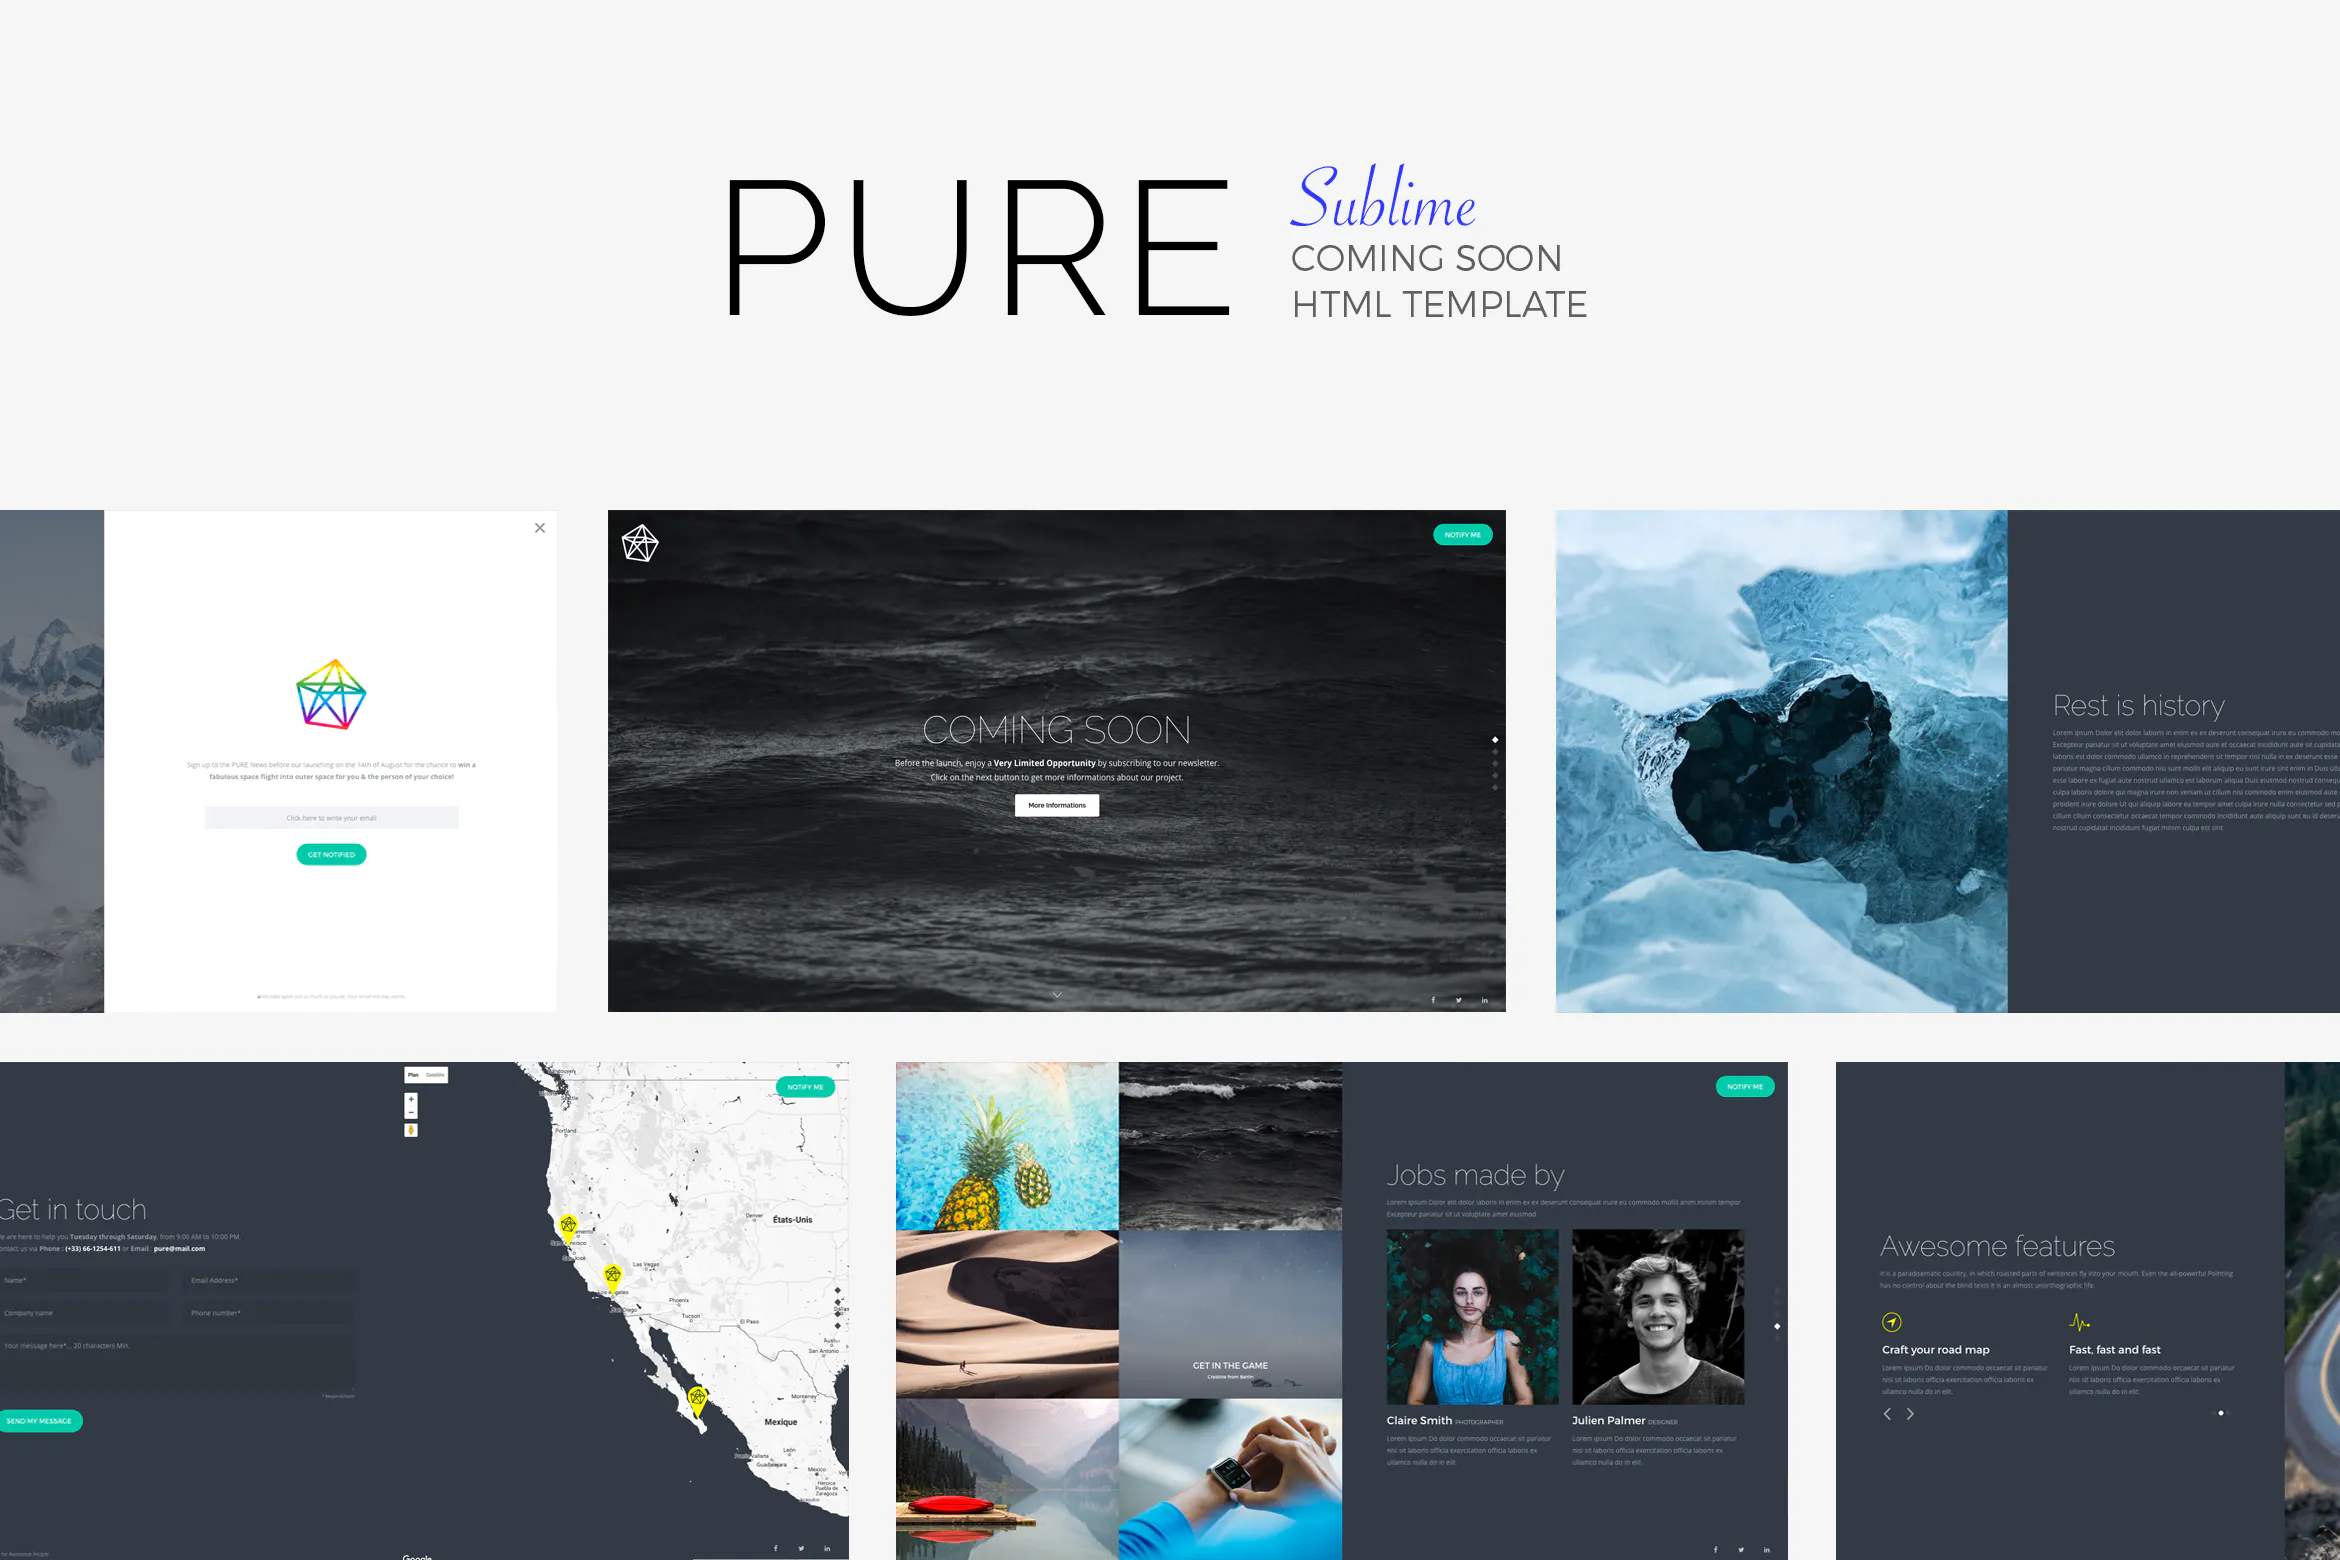 PURE - Sublime Coming Soon Template插图